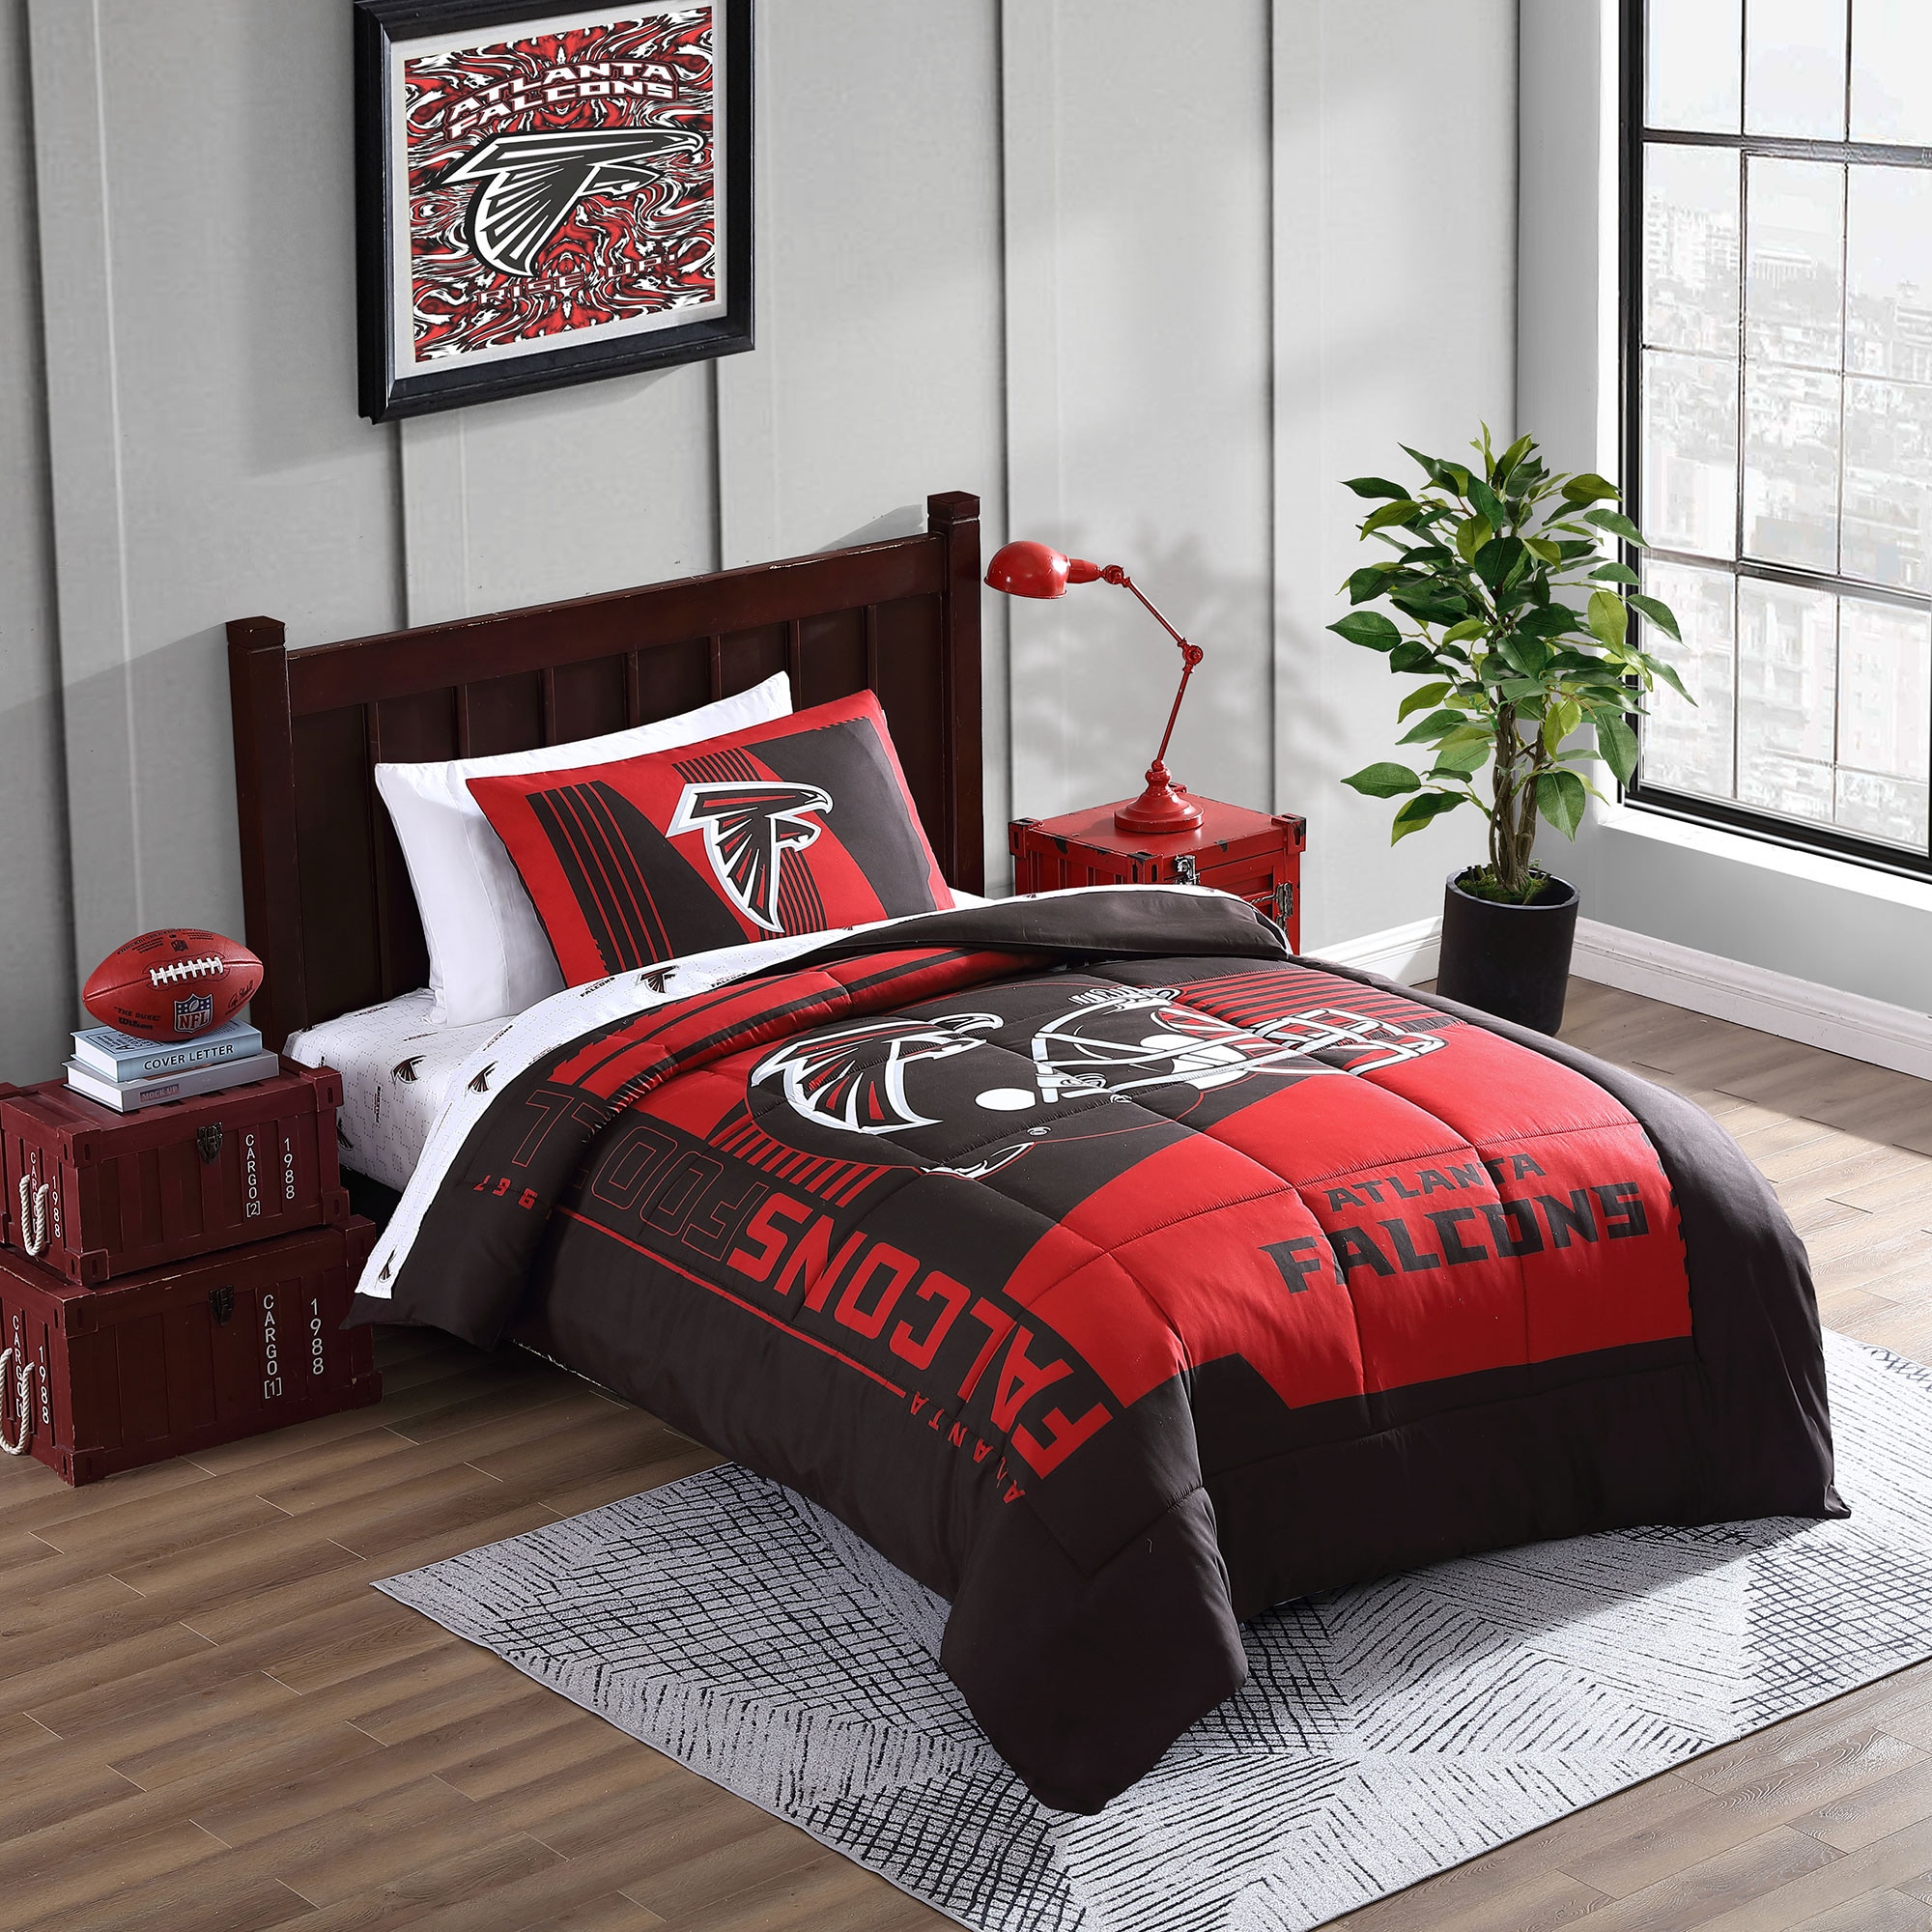 Matching Curtains 72" Drop Football Red Double Duvet Cover and Pillowcase Set 